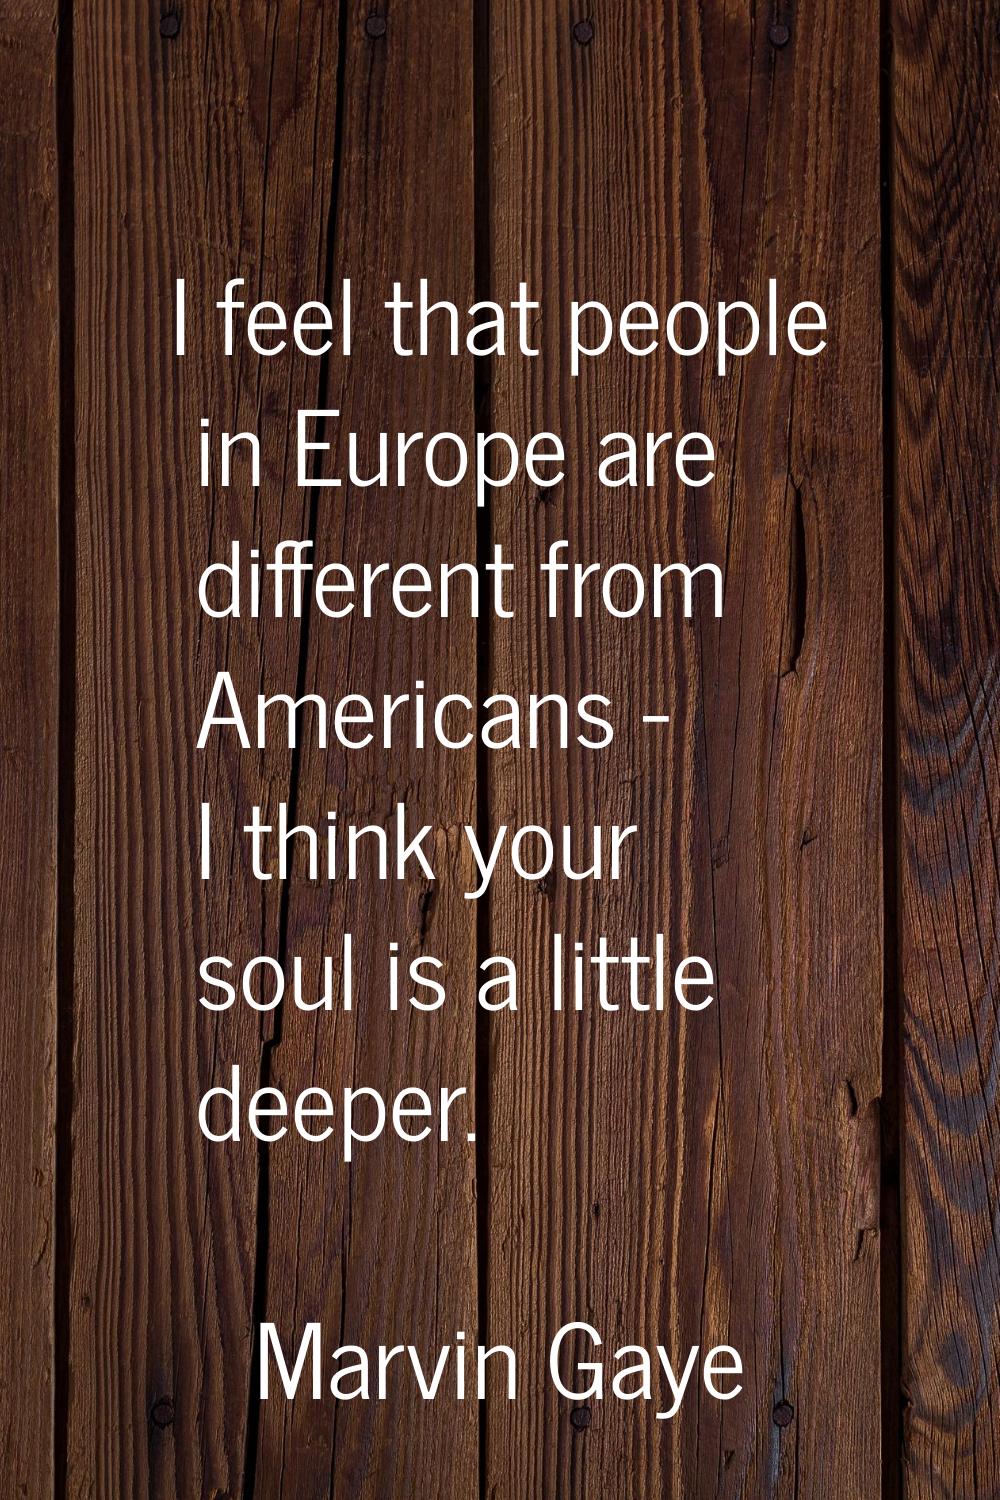 I feel that people in Europe are different from Americans - I think your soul is a little deeper.